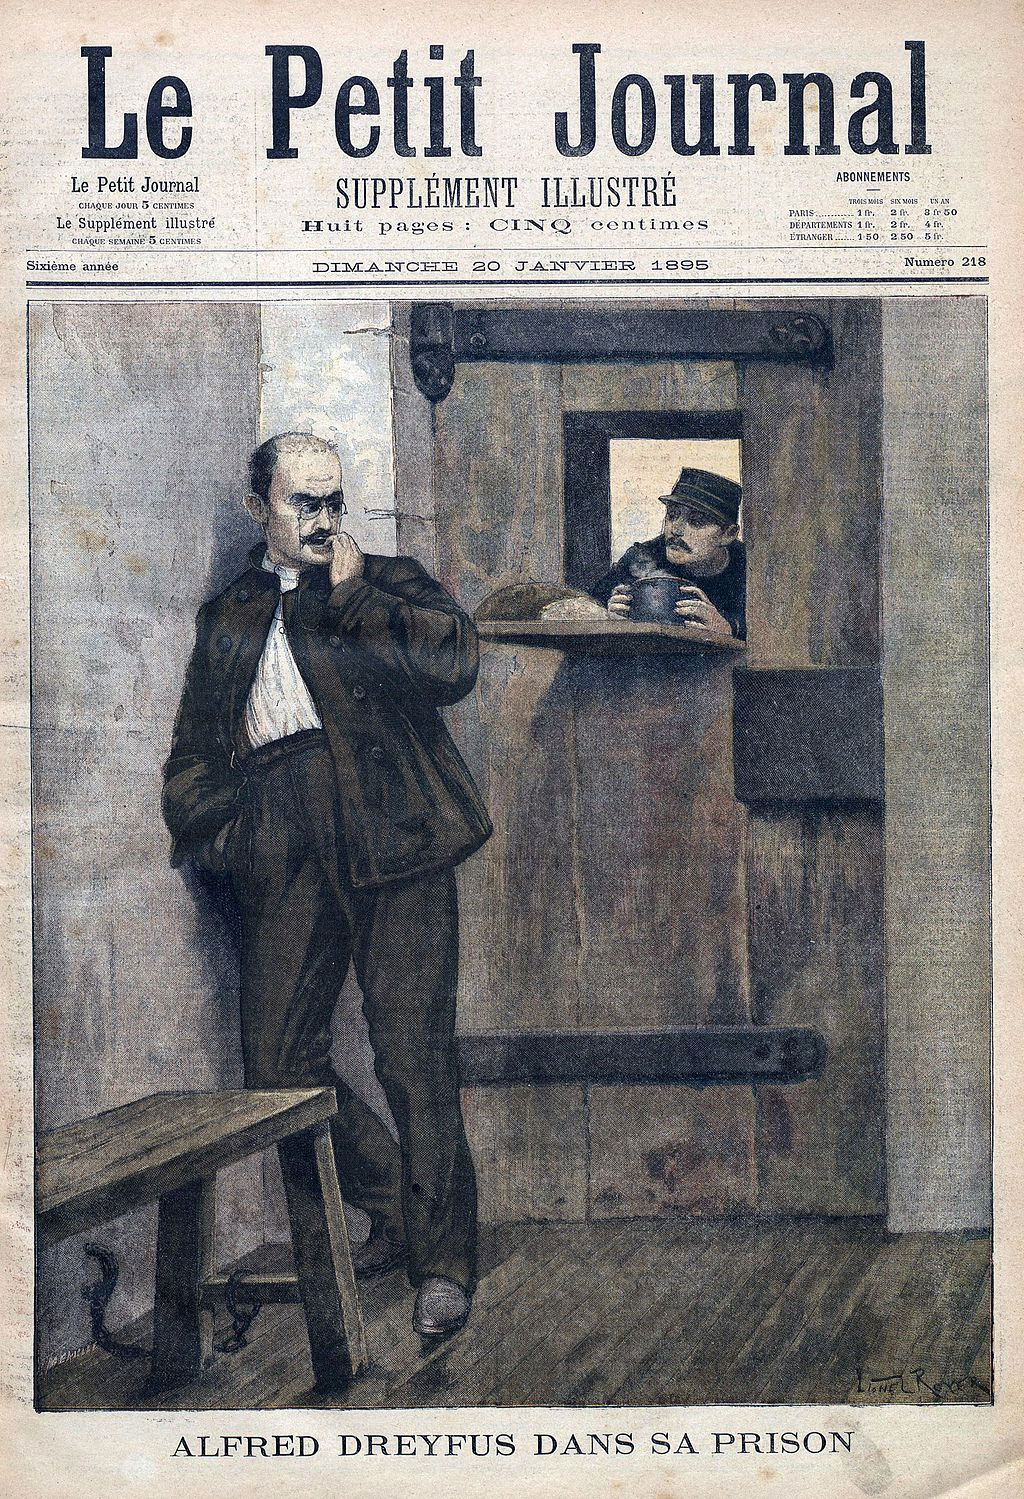 Cover of Le Petit Journal, 20 January 1895 (illustration by Lionel Royer and Fortuné Méaulle)